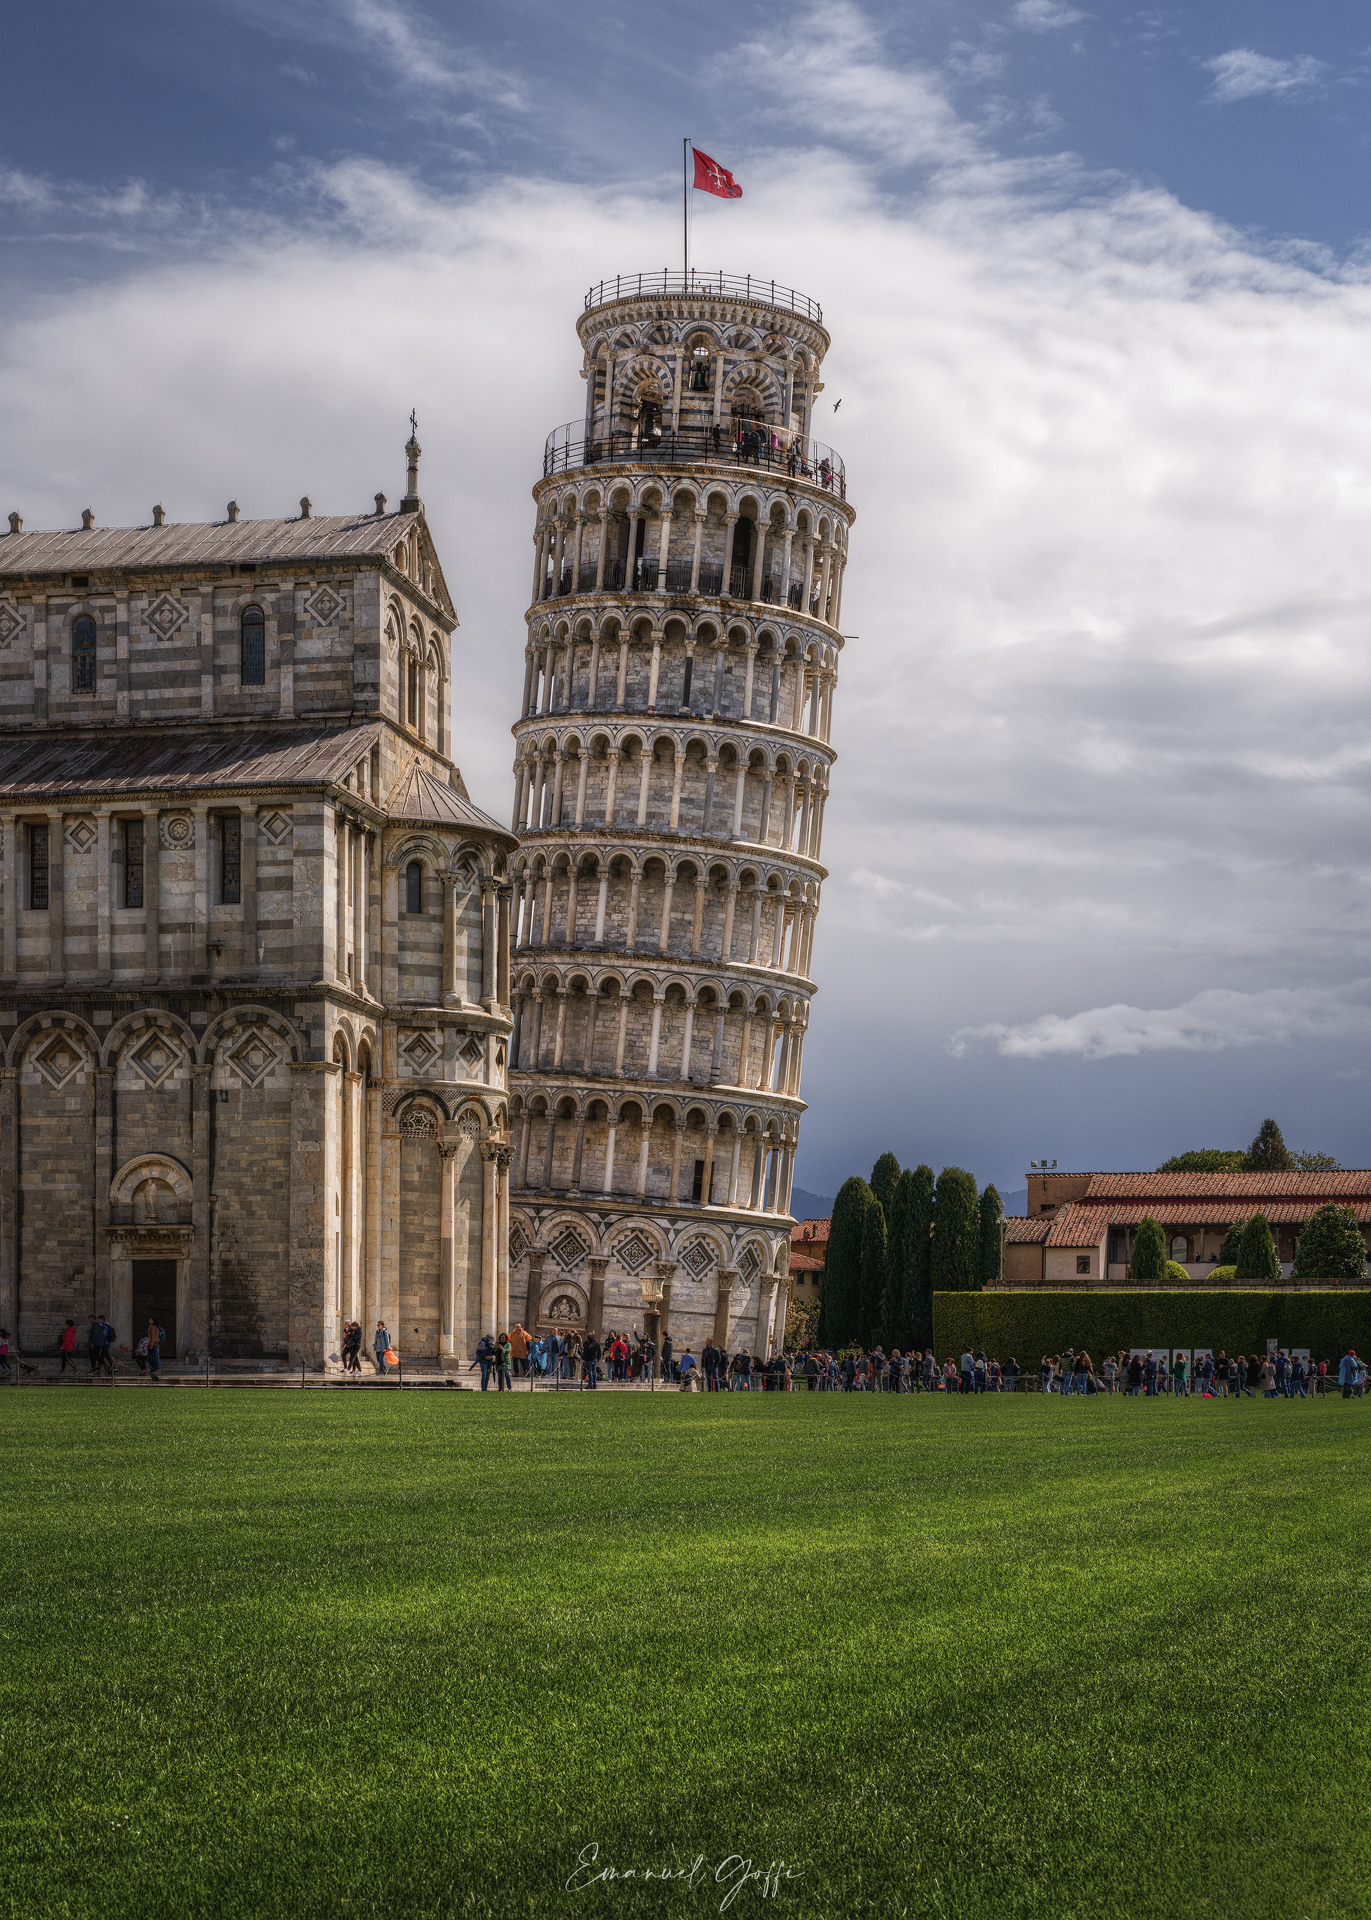 Leaning Tower of Pisa...